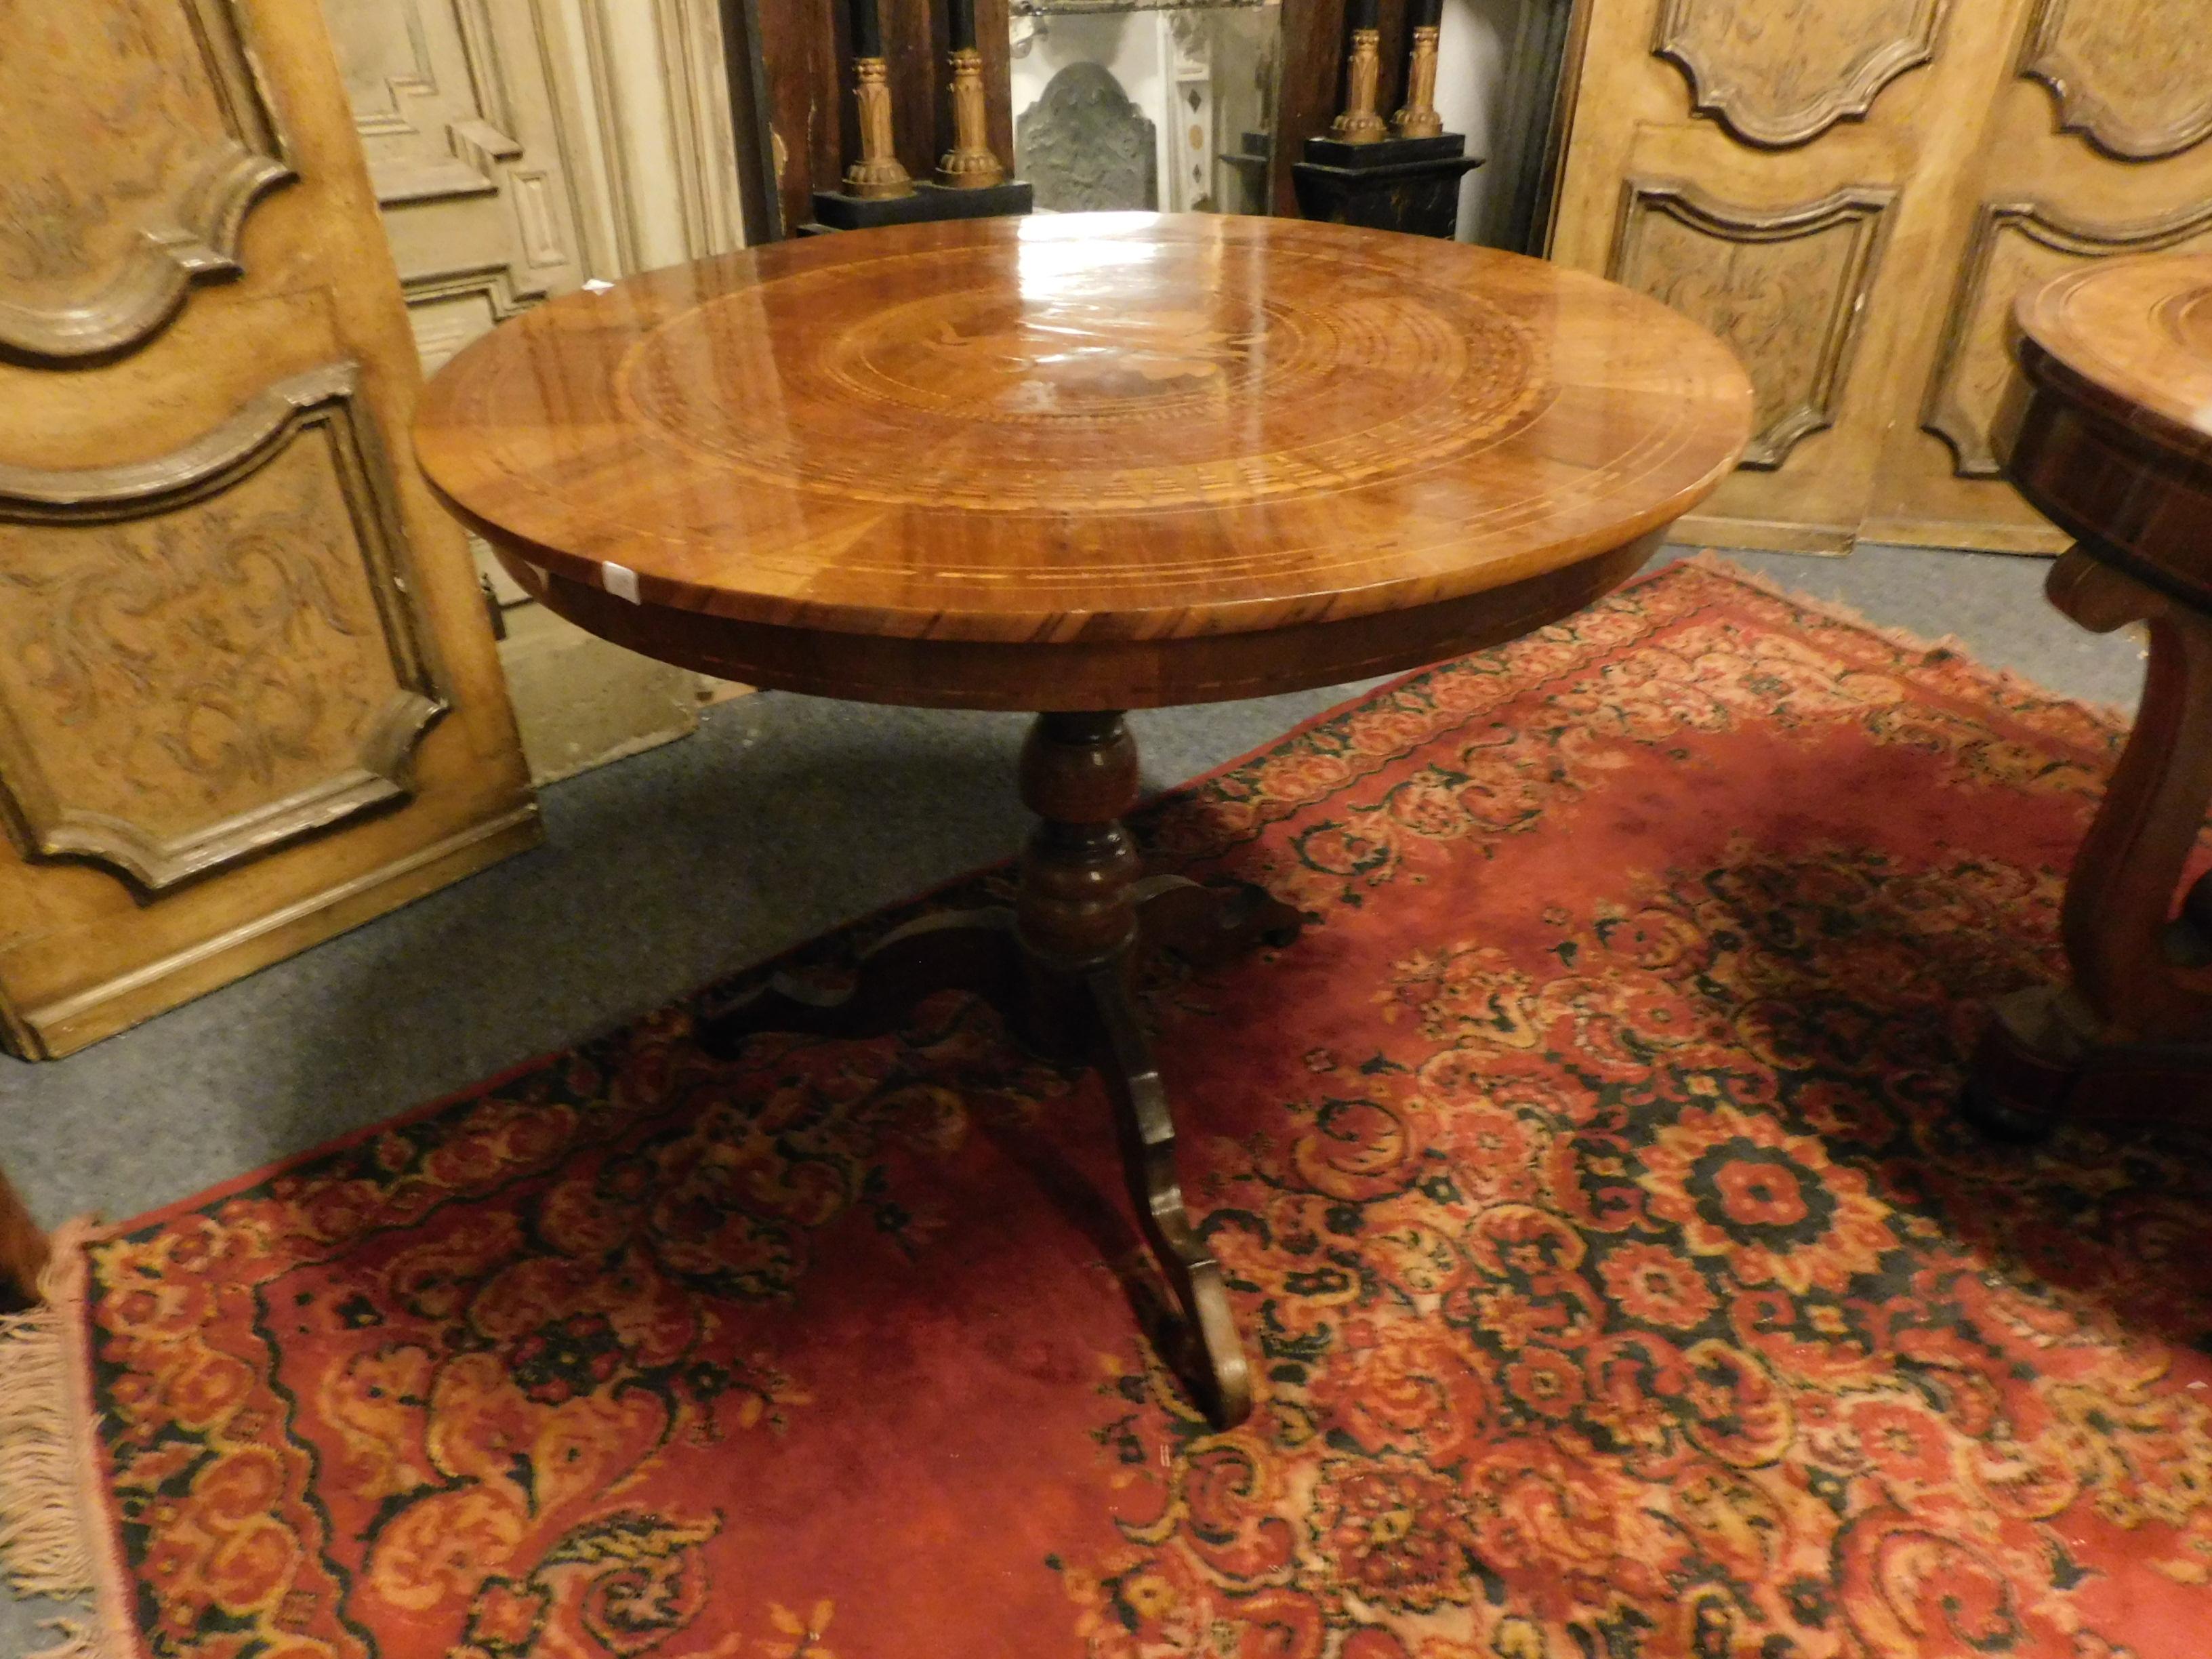 Hand-Carved 18th Century Antique Precious Table Inlaid with Different Woods